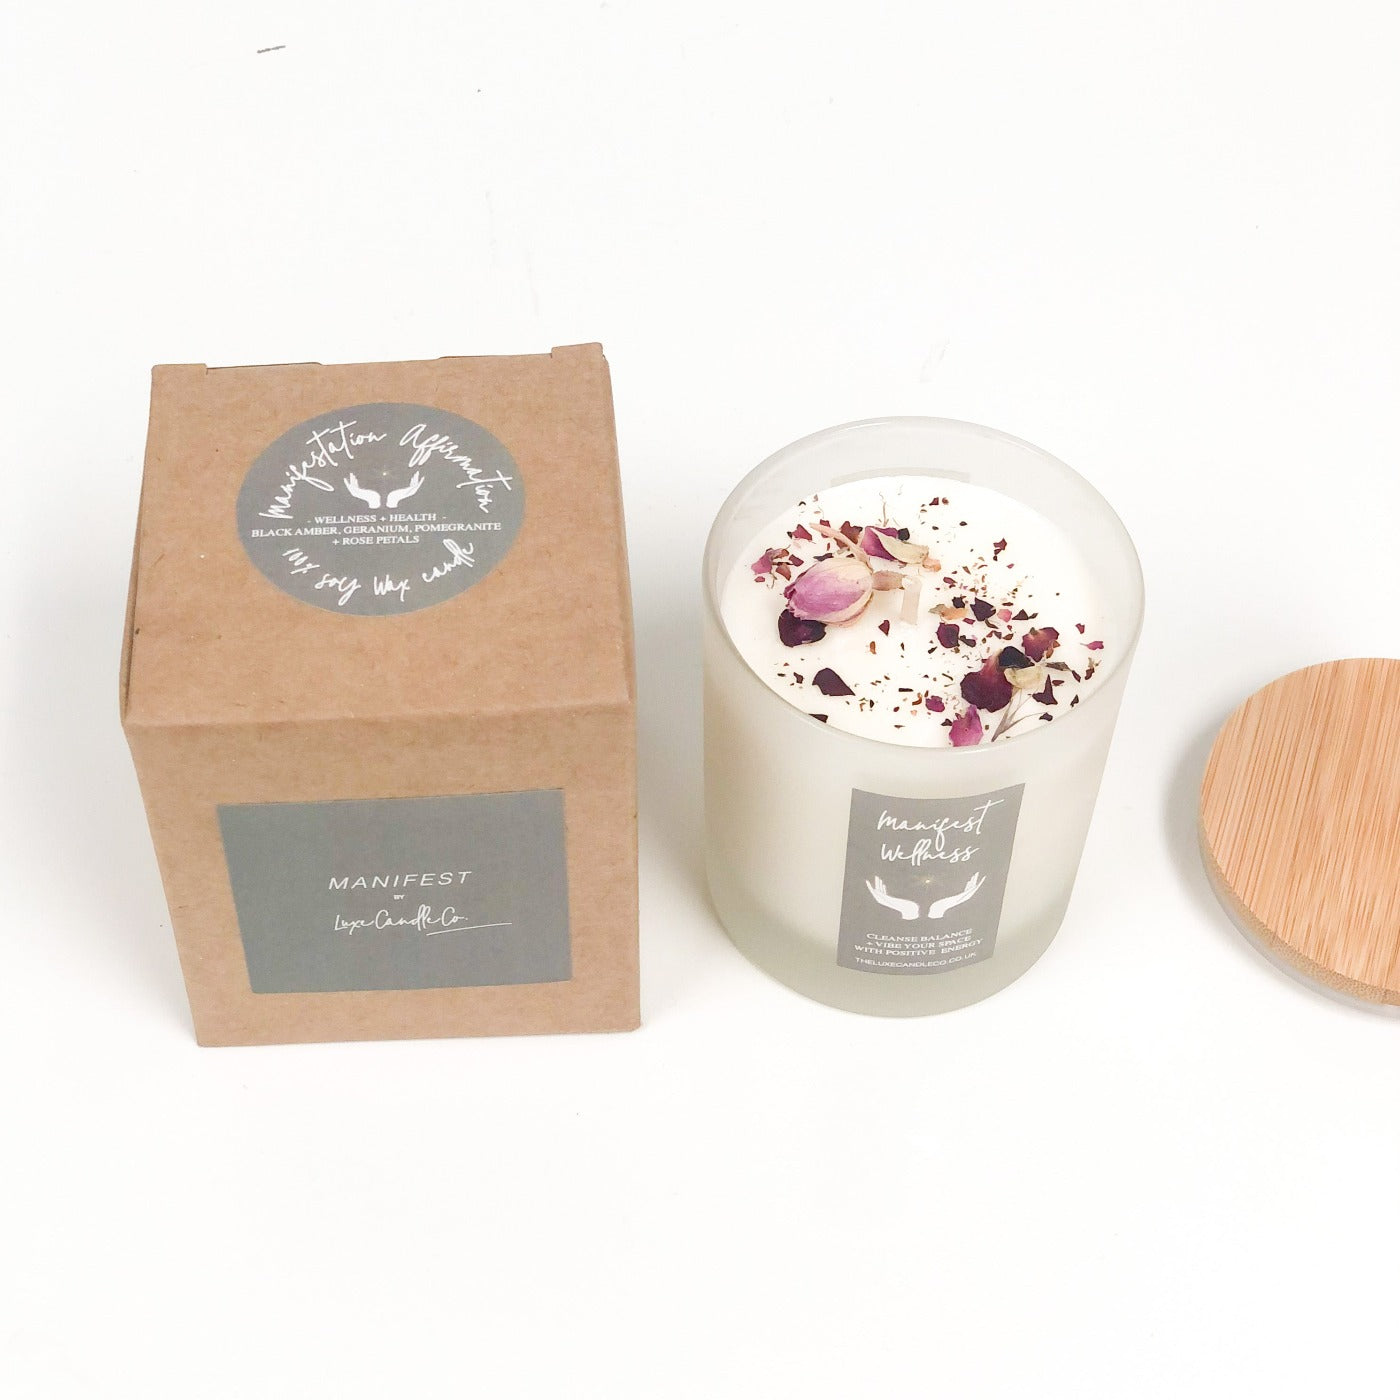 Manifest Health + Wellness Candle . Scented Soy Wax Candle